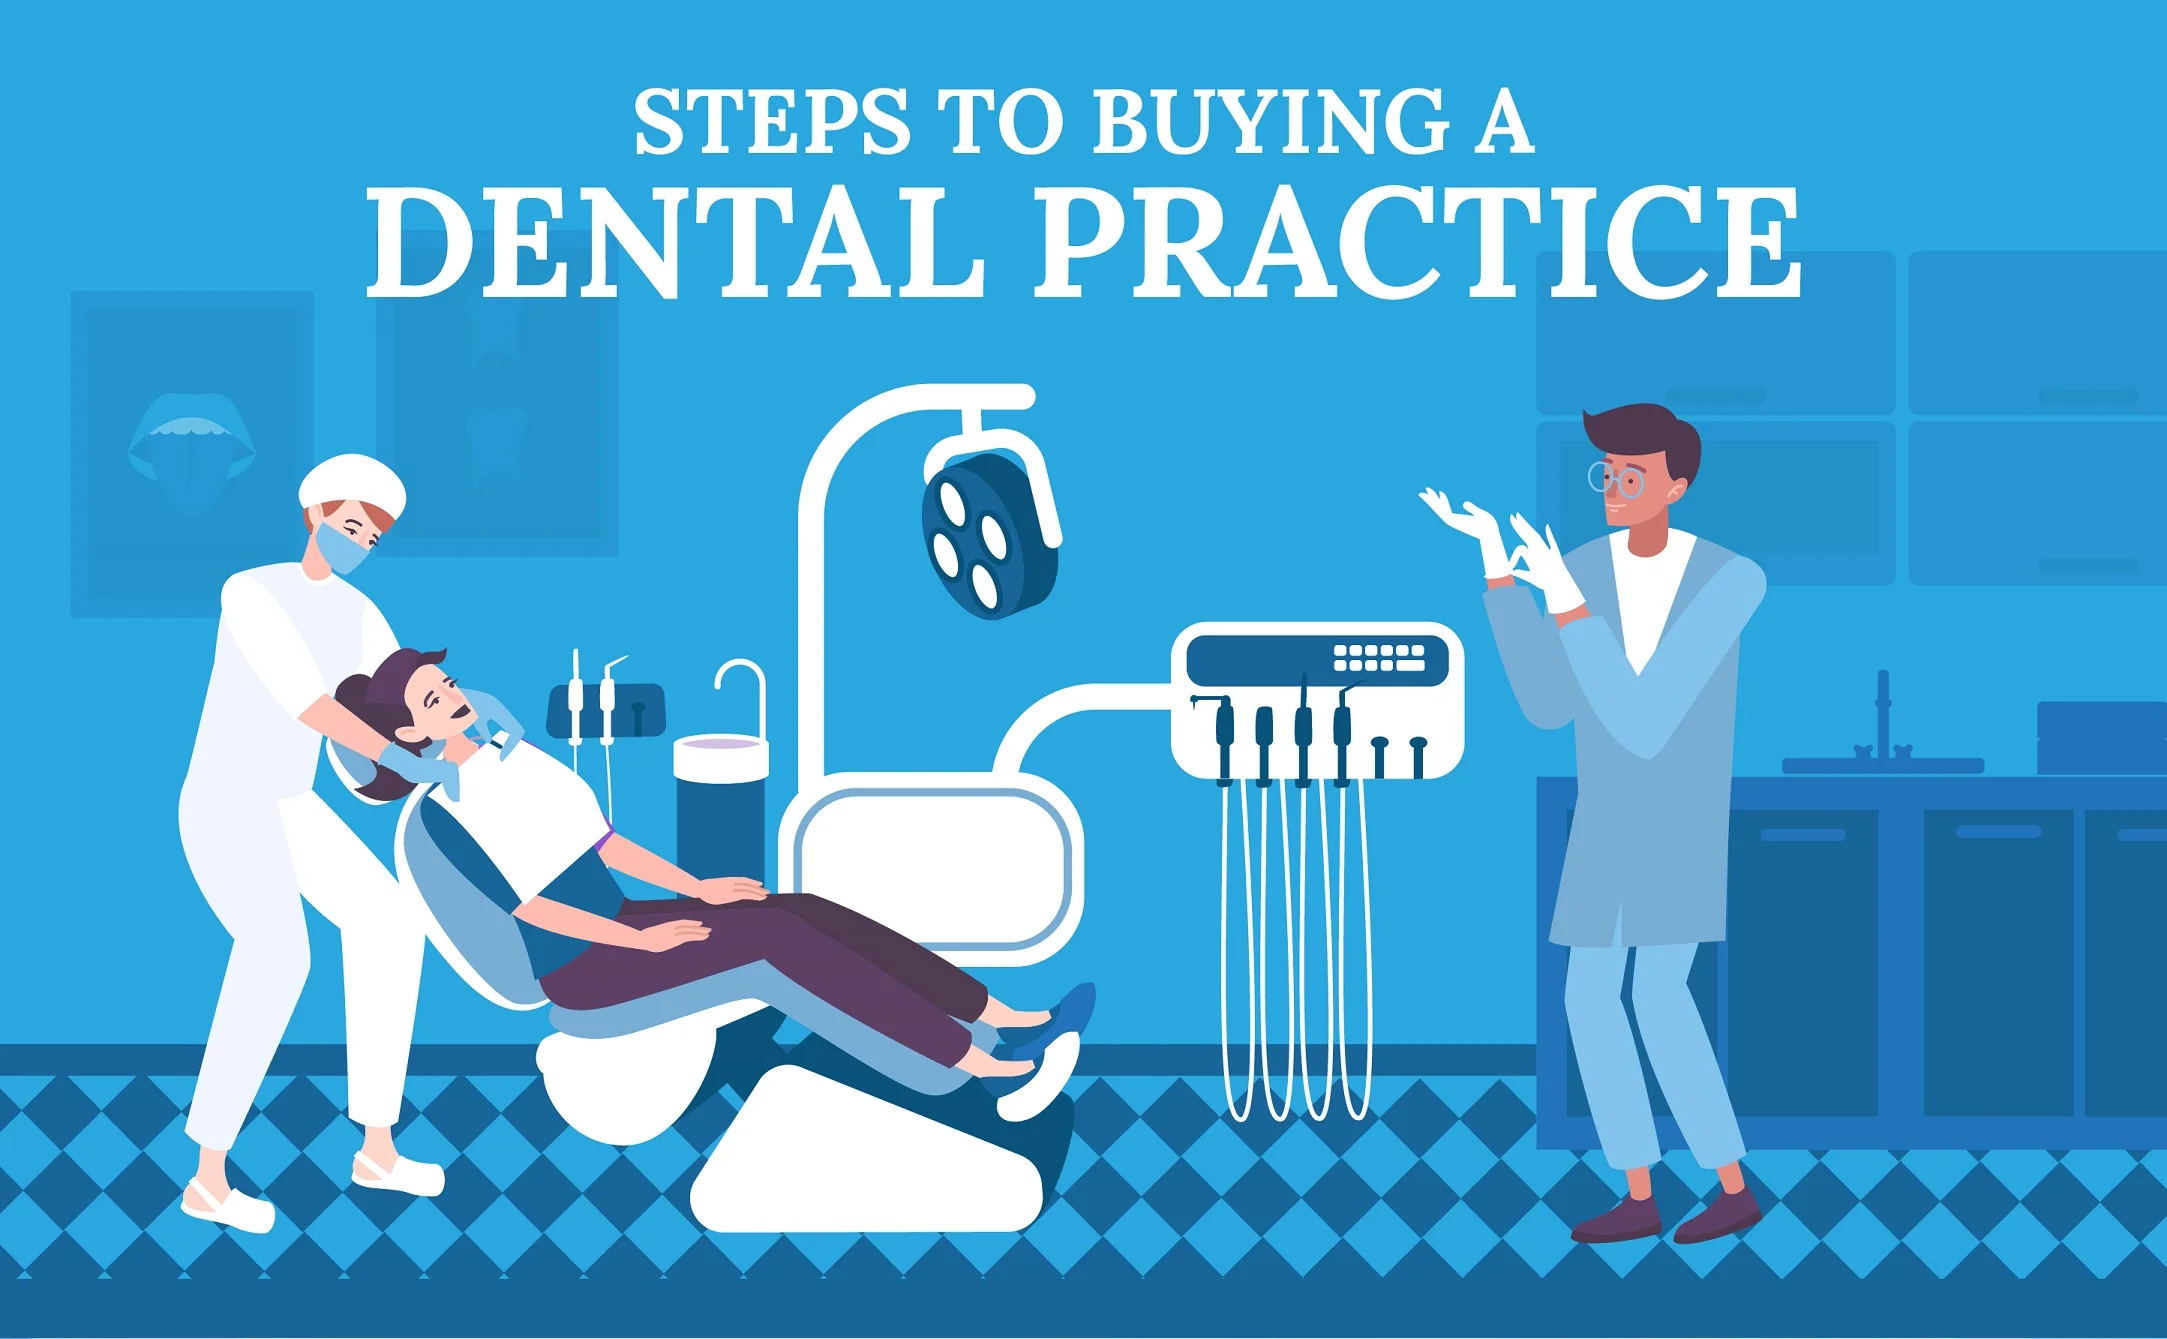 Dental Practice Purchase Infographic